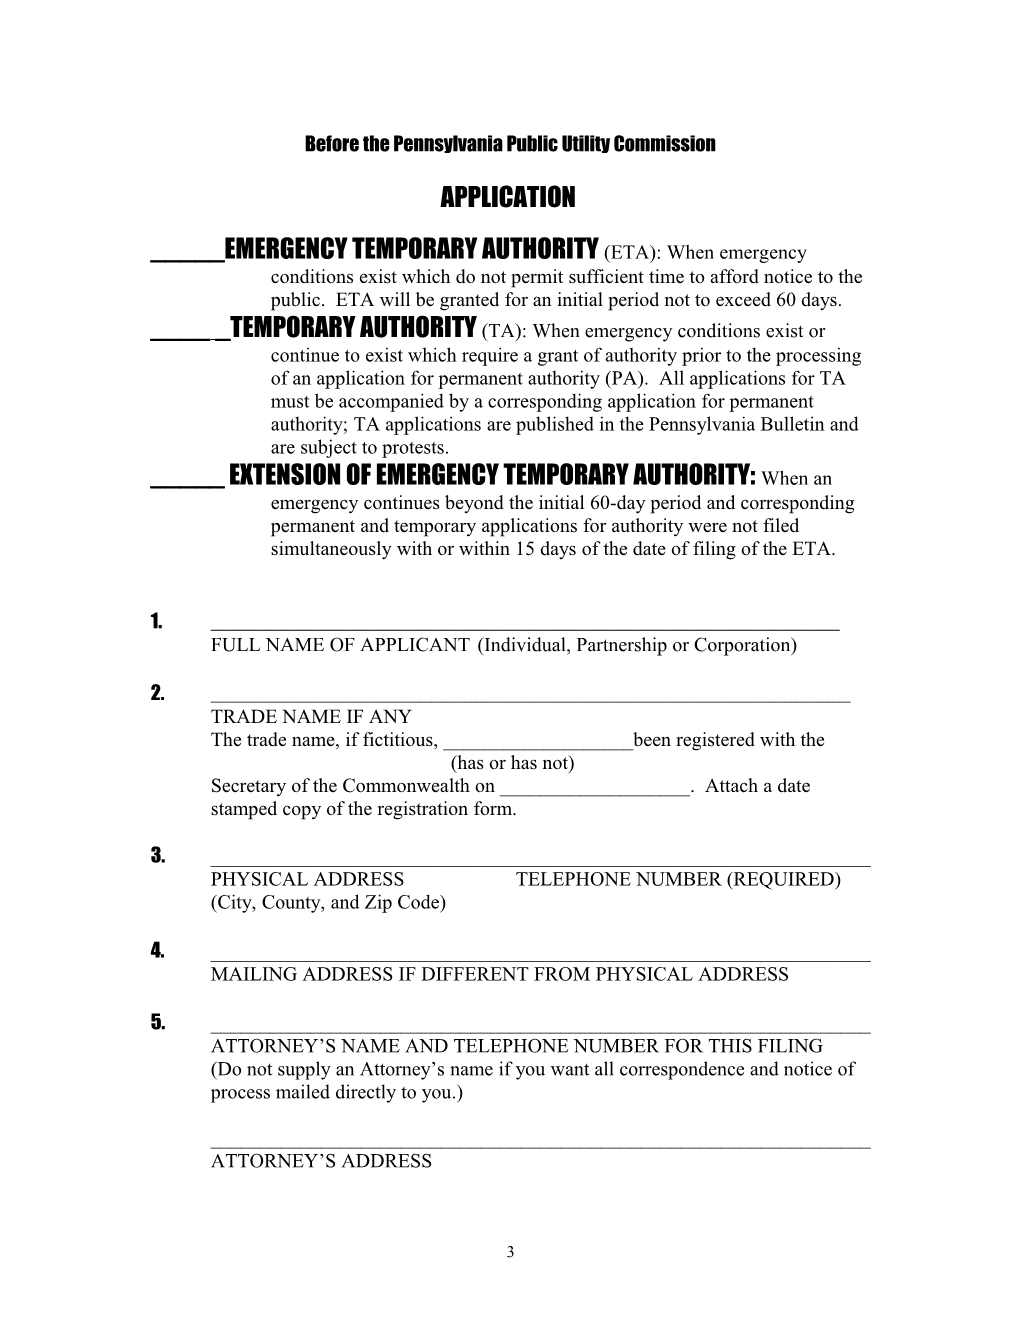 PUC 182 (Revised 4/02): Emergency Temporary Authority and Temporary Authority